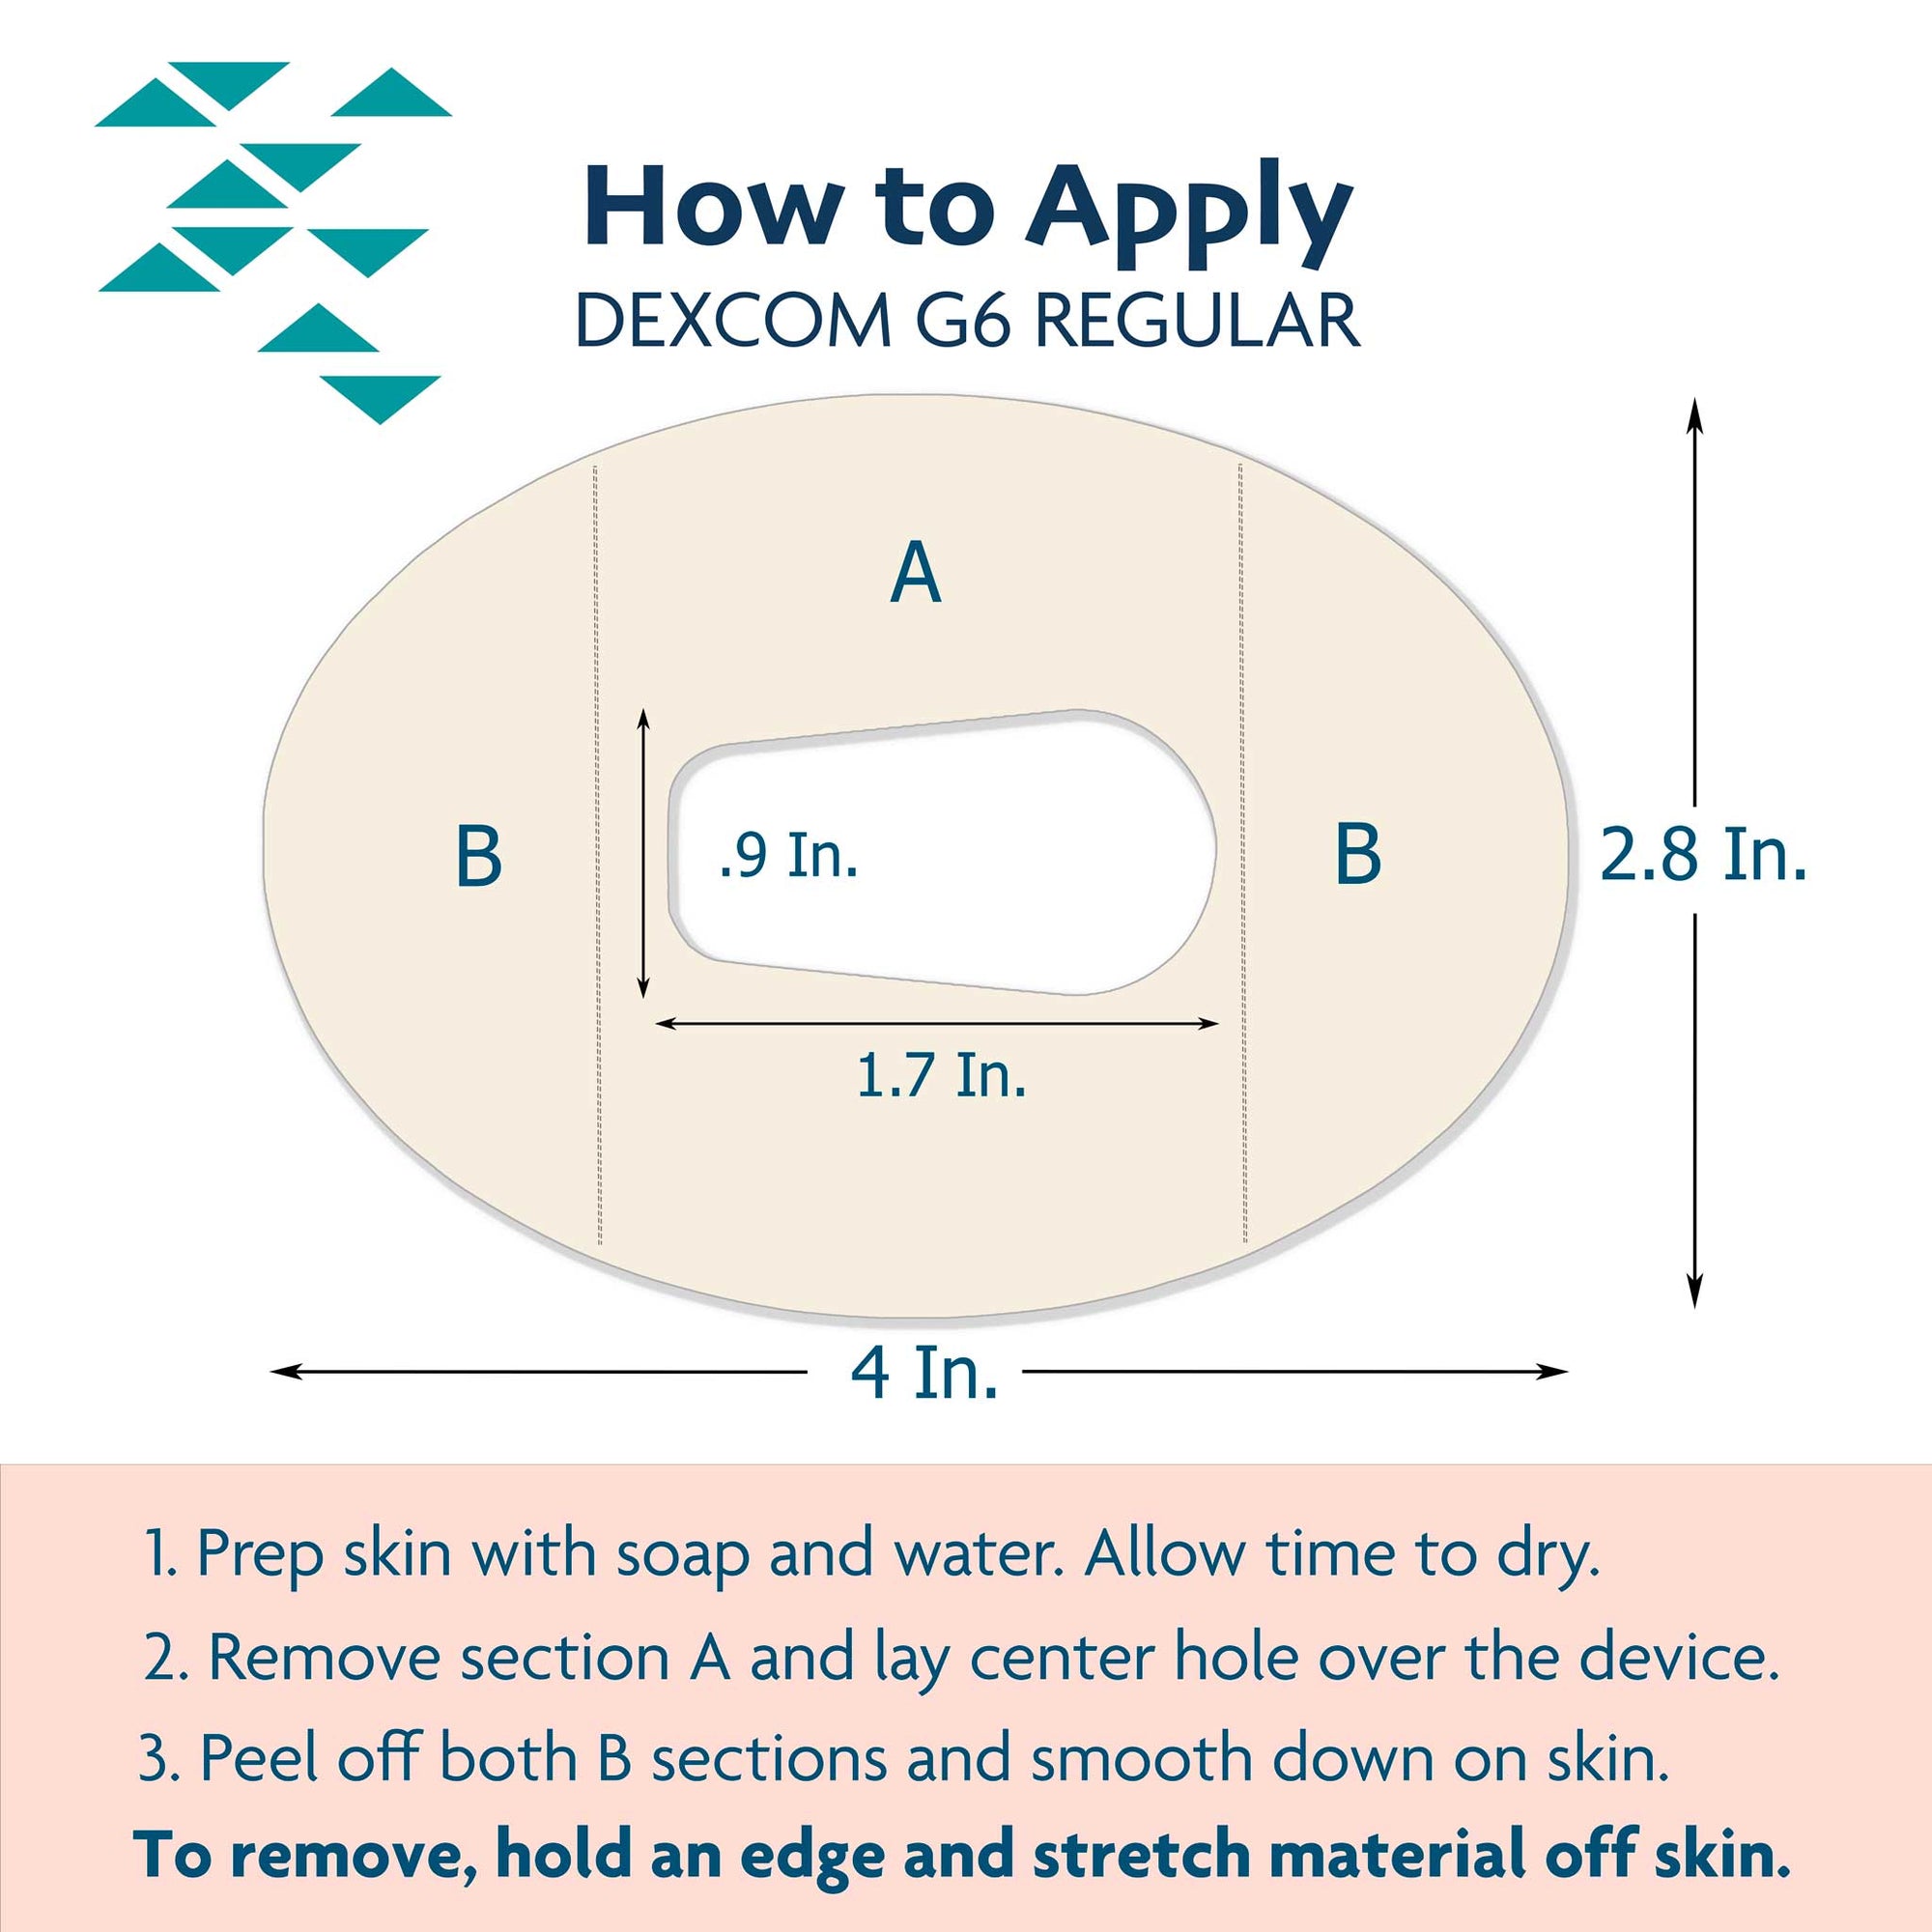 ExpressionMed Instructions to properly apply Dexcom G6 CGM overpatch